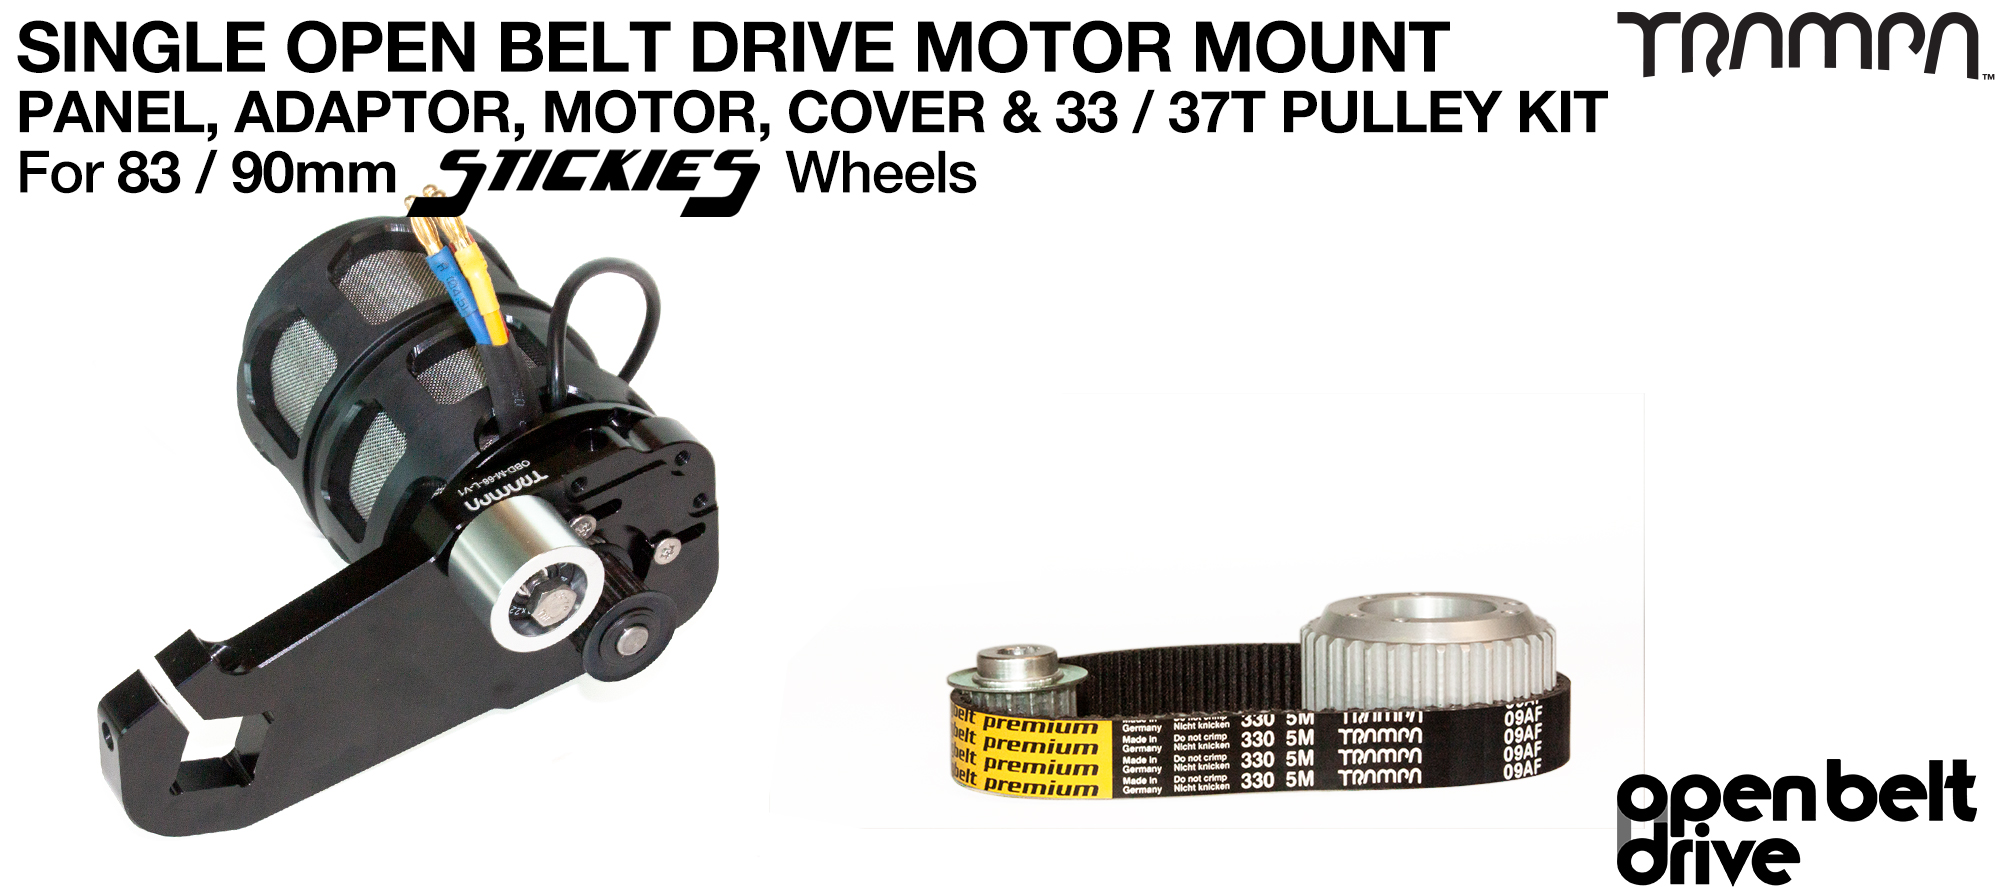 66T OBD Motor Mount with 33 / 37T Pulley kit, Motor & Filters  - SINGLE